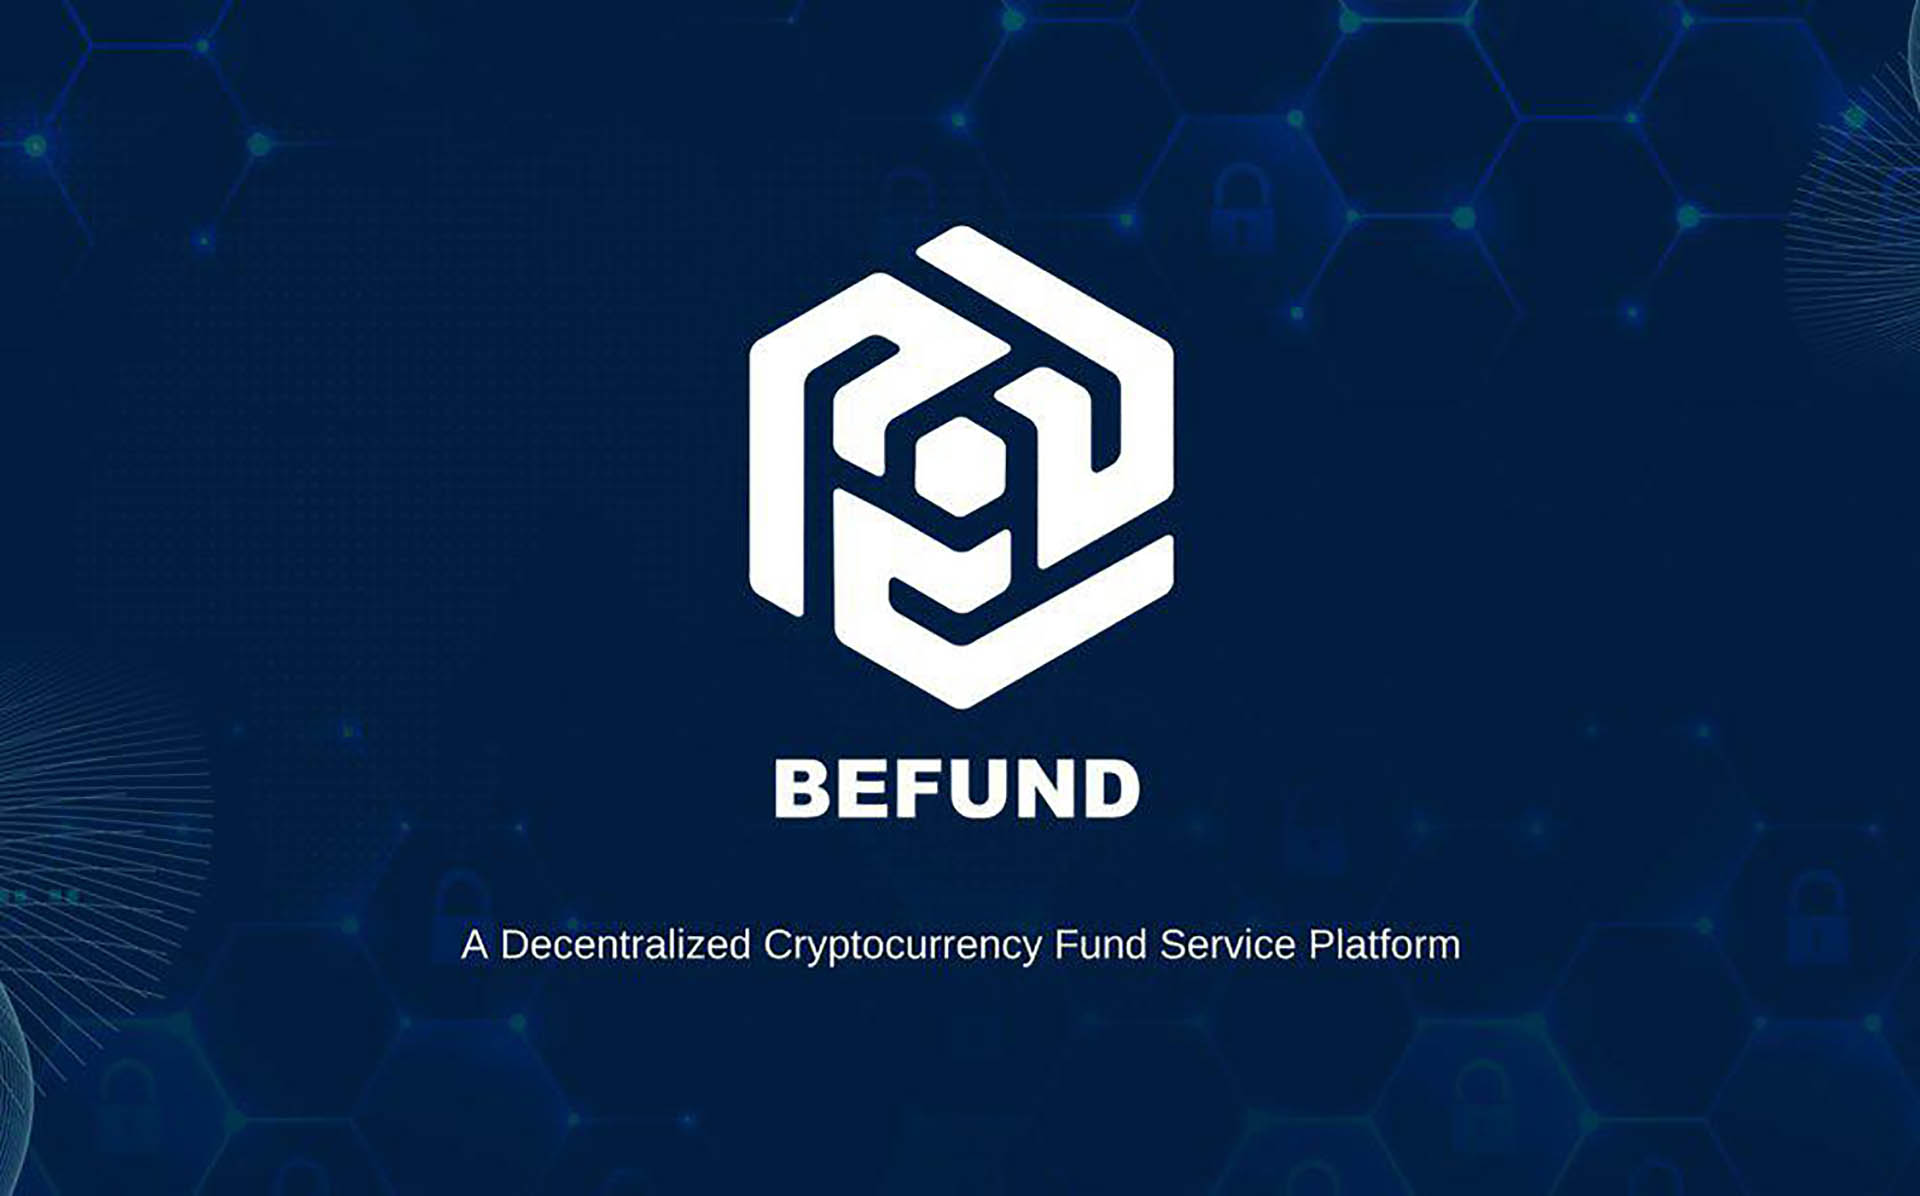 Non-Profit Befund Service Platform Attracts International Attention from Top Capital Fund Companies